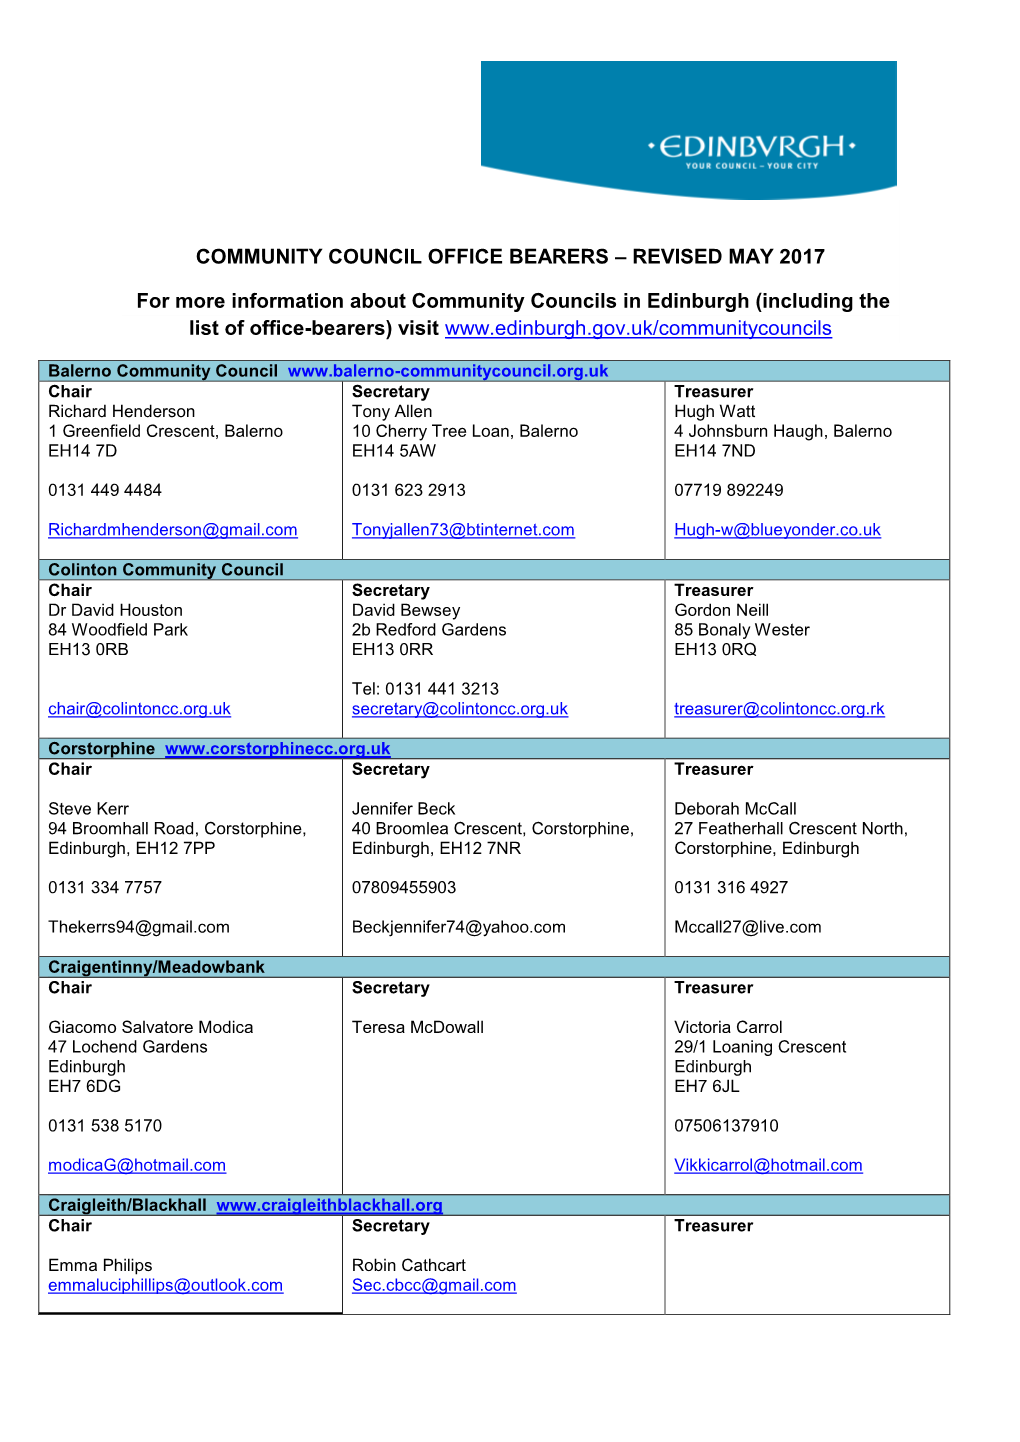 Community Council Office Bearers – Revised May 2017